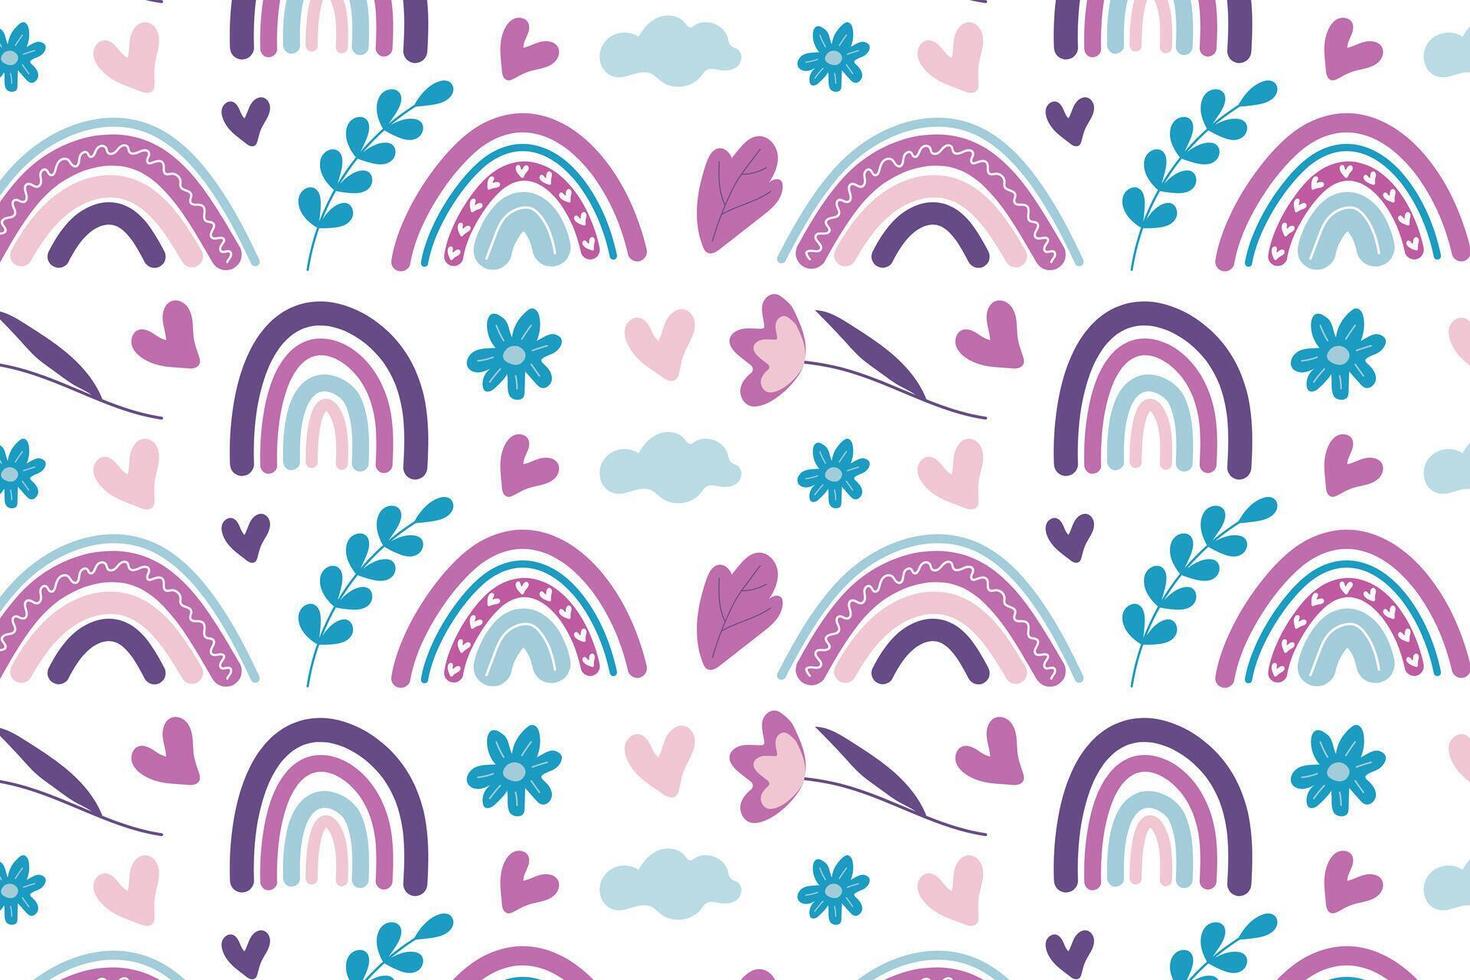 Rainbow background with rainbows and flowers in Scandinavian style, in lilac tones. vector